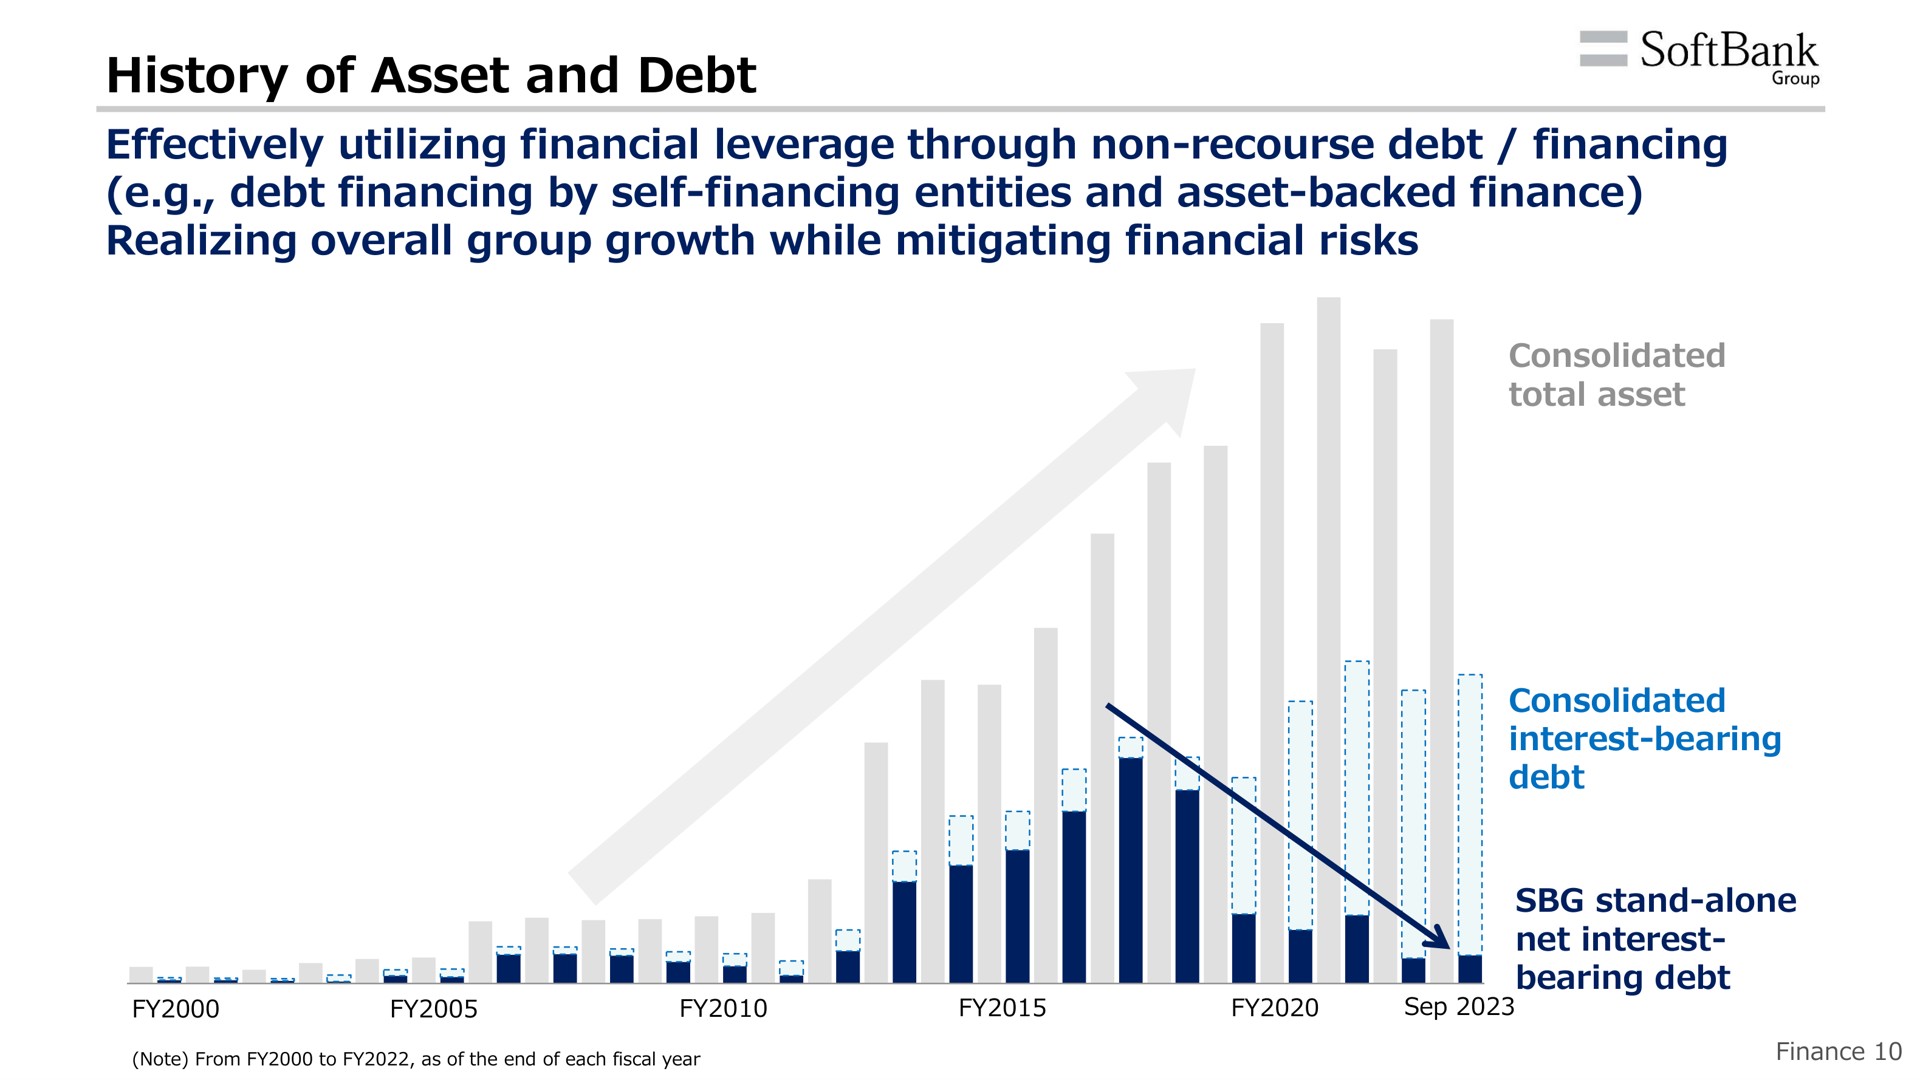 history of asset and debt consolidated | SoftBank